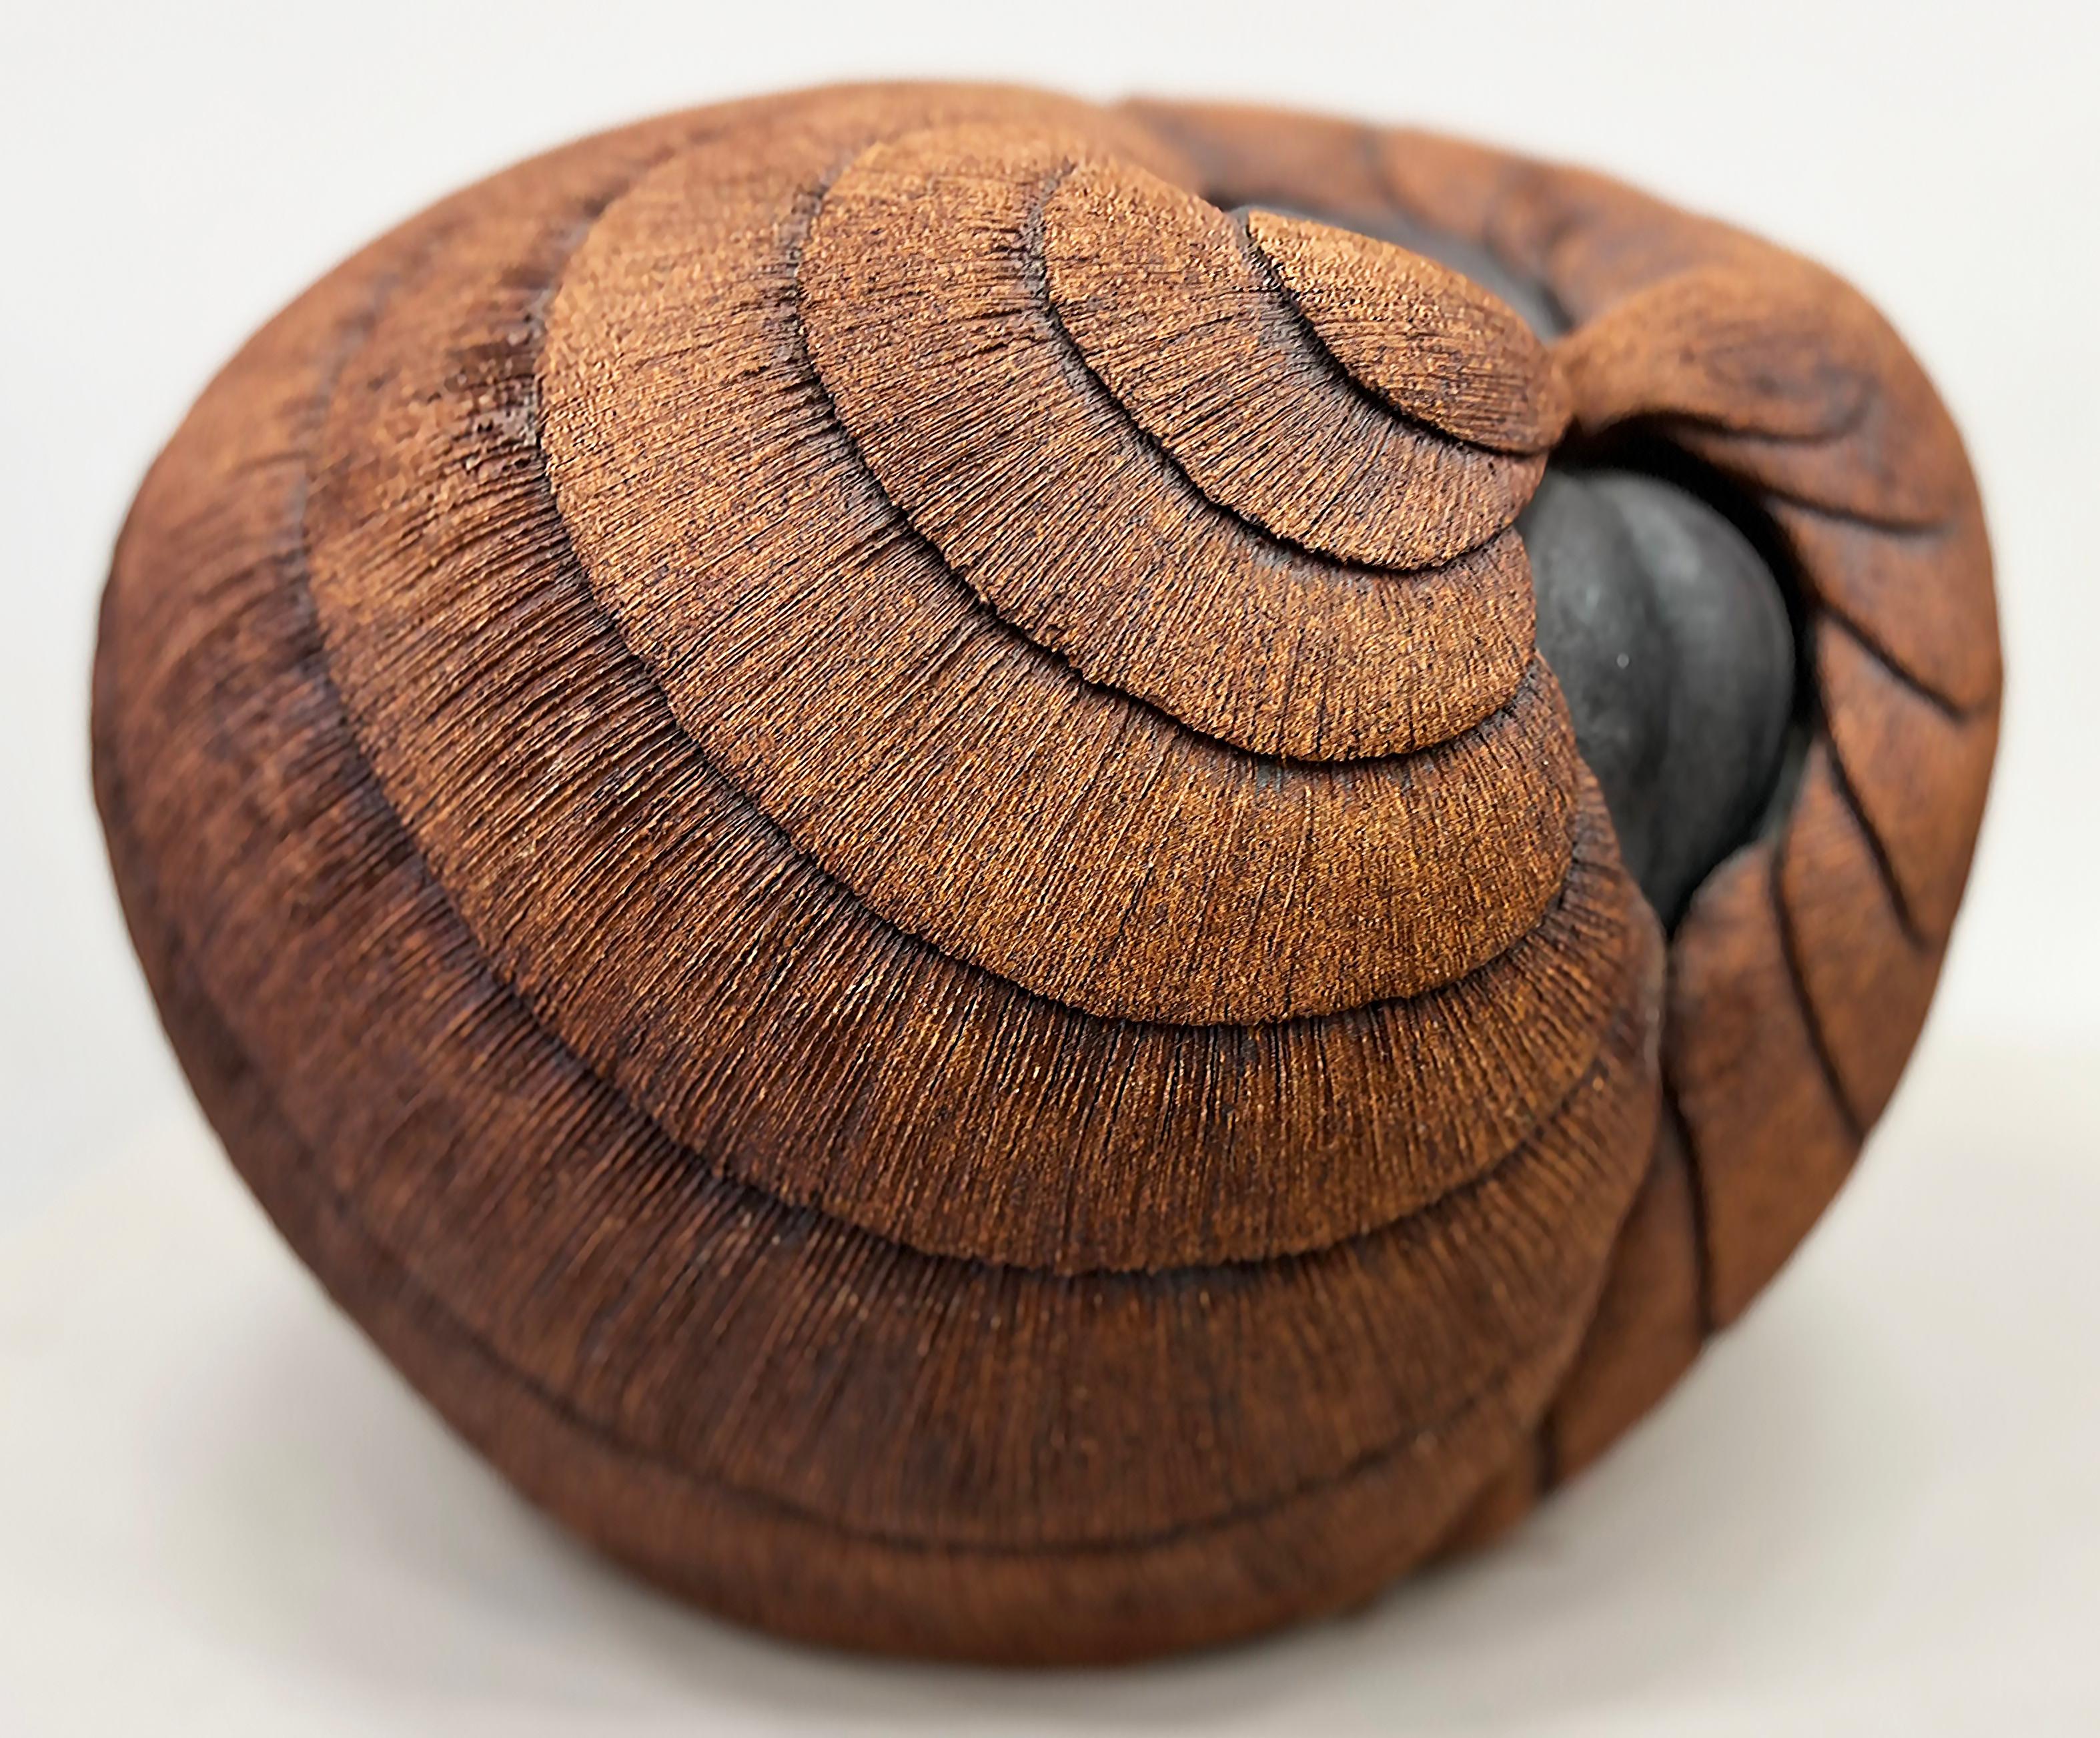 1960s Vintage Overscale Organic Studio Pottery Sculpture with Great Textures

Offered for sale is a vintage overscale studio pottery sculpture with a seductive organic design. The sculpture has great texture and was crafted with exquisite execution.